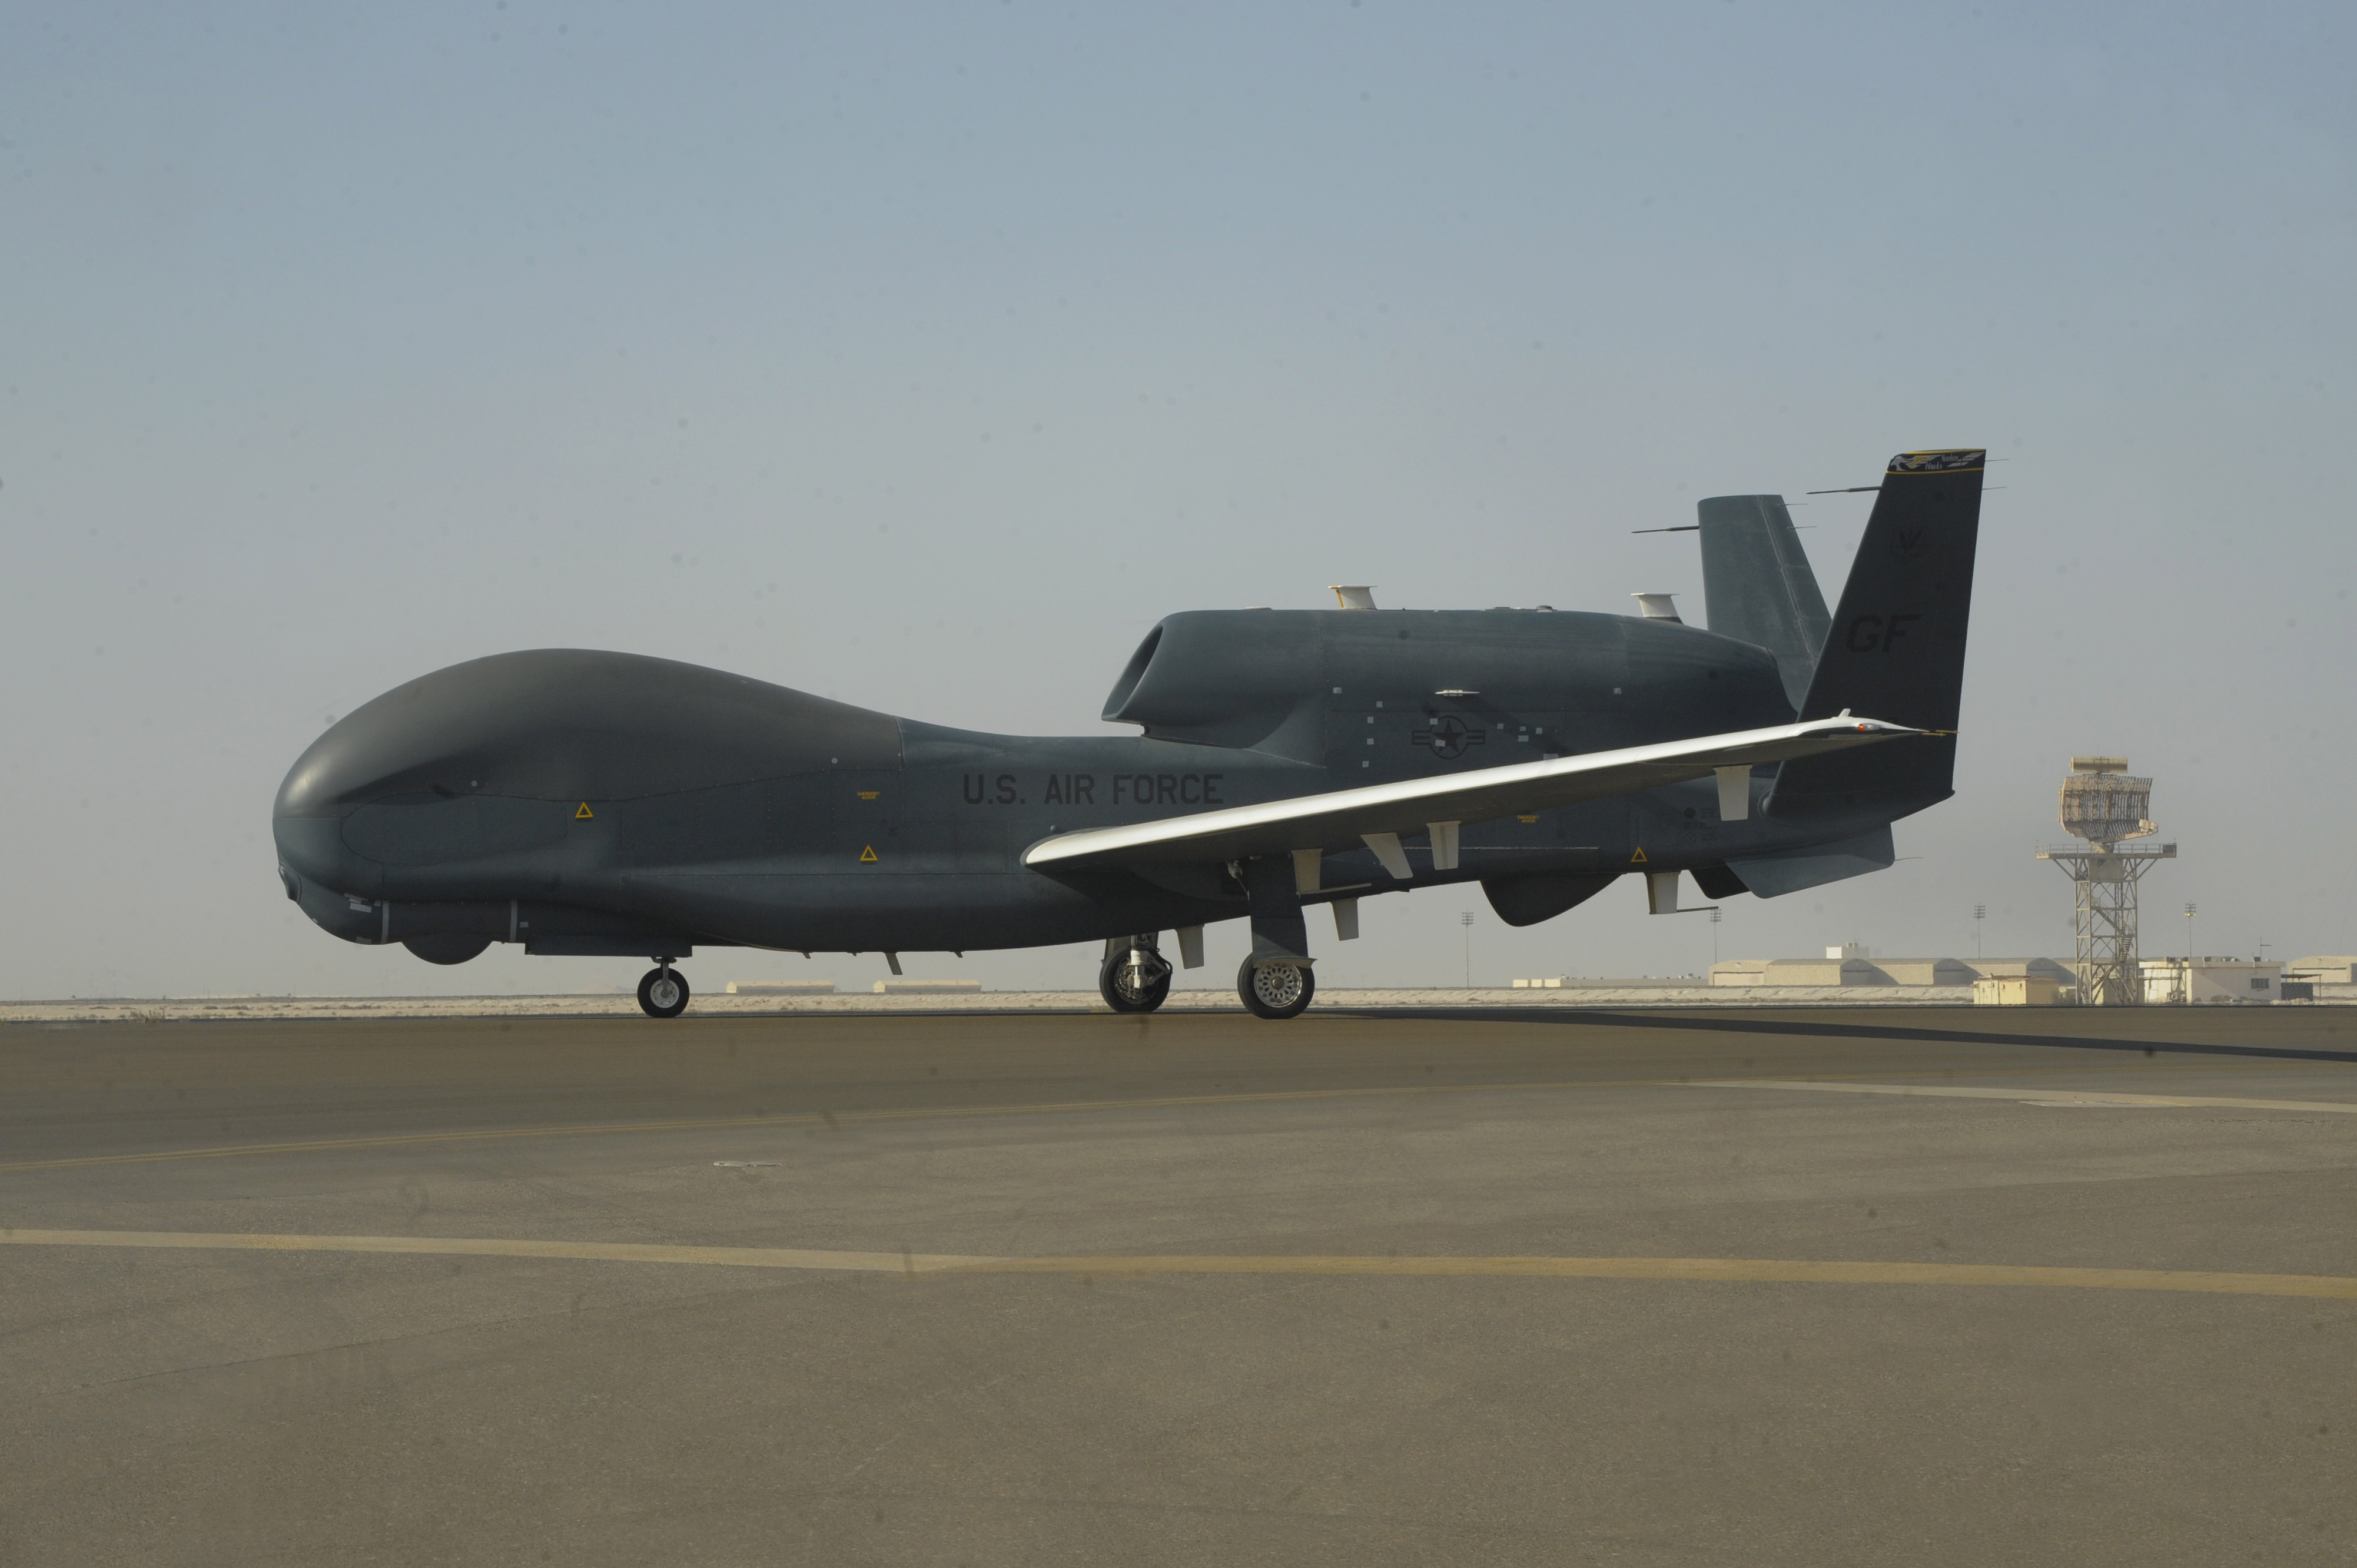 epa07660711 A handout photo made available by the US Air Force shows a RQ-4 Global Hawk unmanned airccraft at Al Dhafra Air Base, United Arab Emirates, 13 February 2019 (issued 20 June 2019). Media reports on 20 June 2019 state that Iran's Islamic Revolution Guards Corps (IRGC) claim to have shot down a US spy drone over Iranian airspace, near Kuhmobarak in Iran's southern Hormozgan province. The US military has confirmed one of their drones was hit by an Iranian missile.  EPA/Darrion Brownin / US AIR FORCE HANDOUT  HANDOUT EDITORIAL USE ONLY/NO SALES